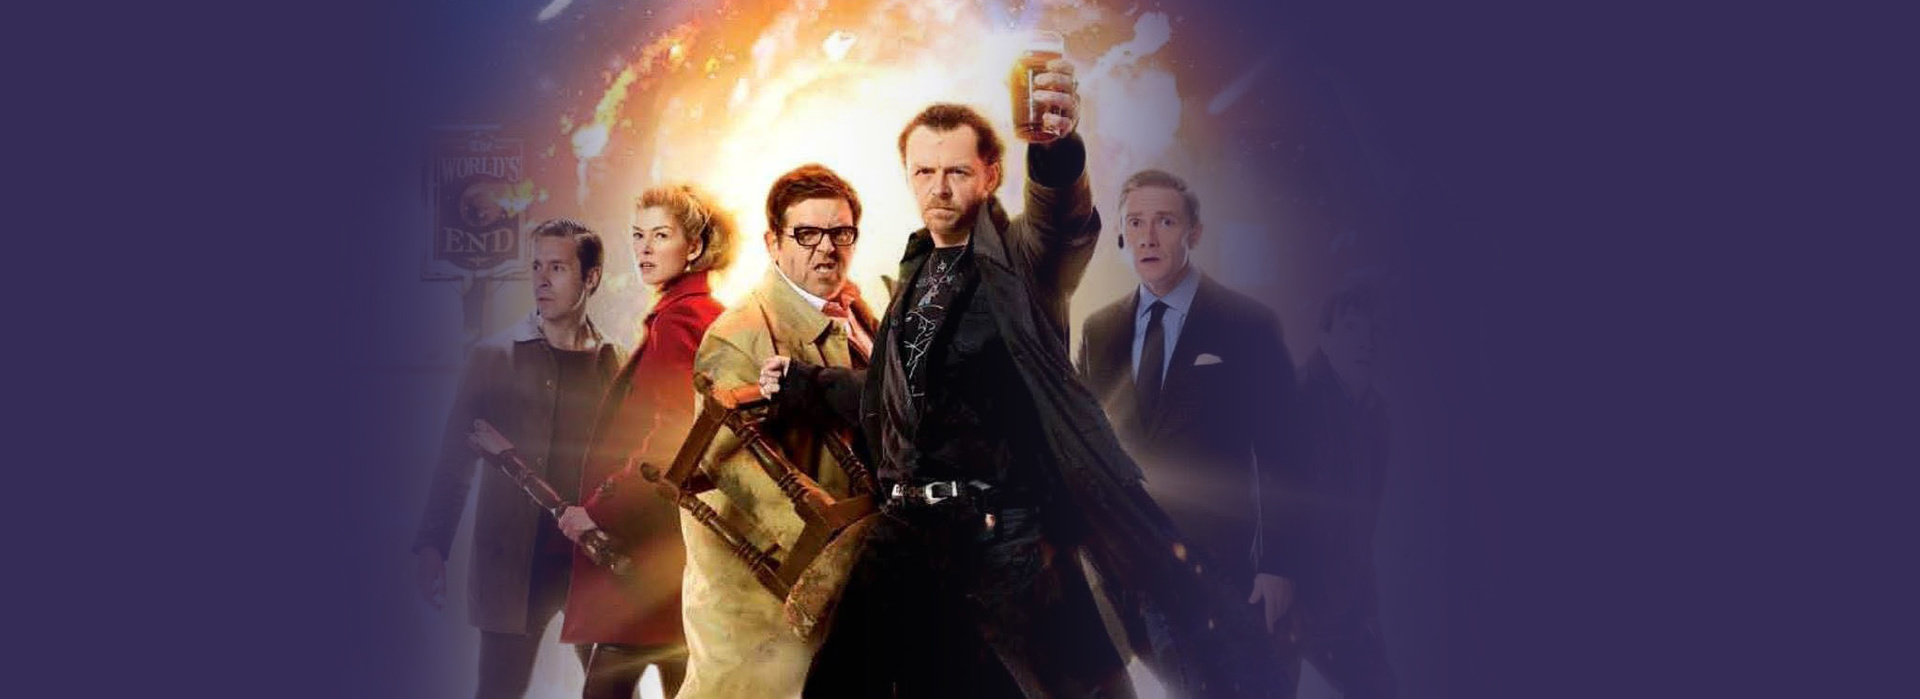 Movie poster The World's End